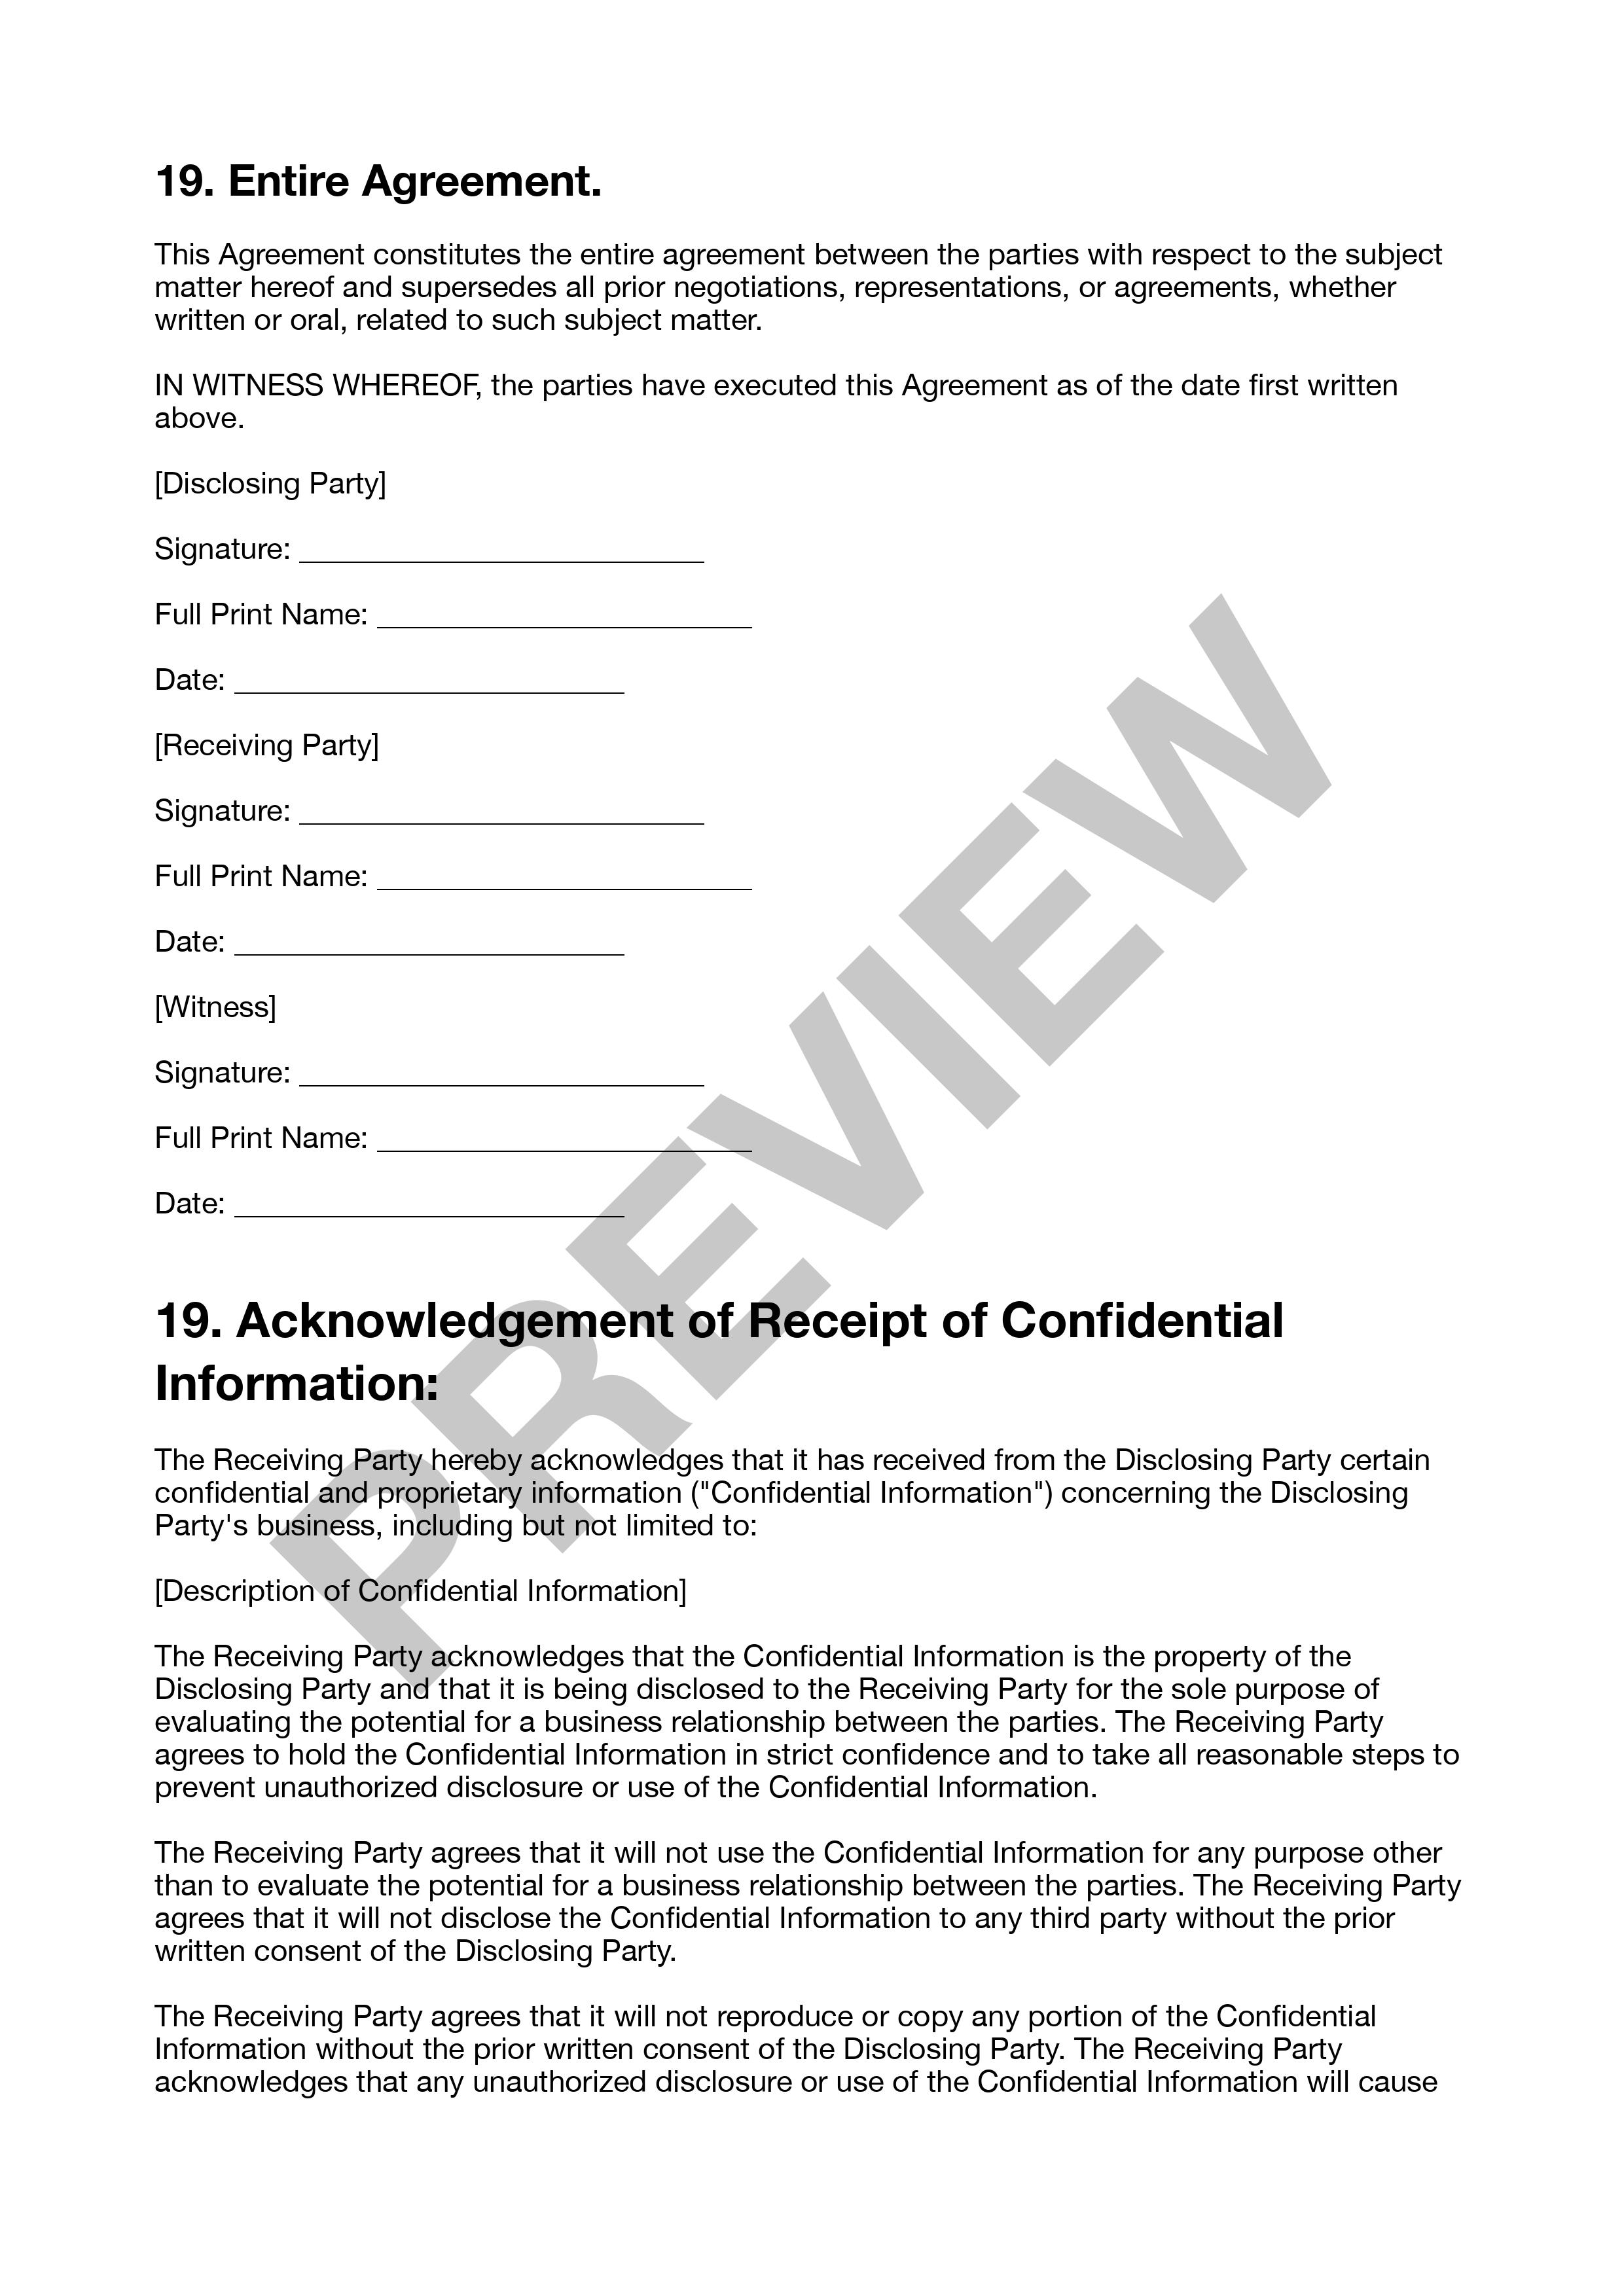 Preview Non-Disclosure Agreement